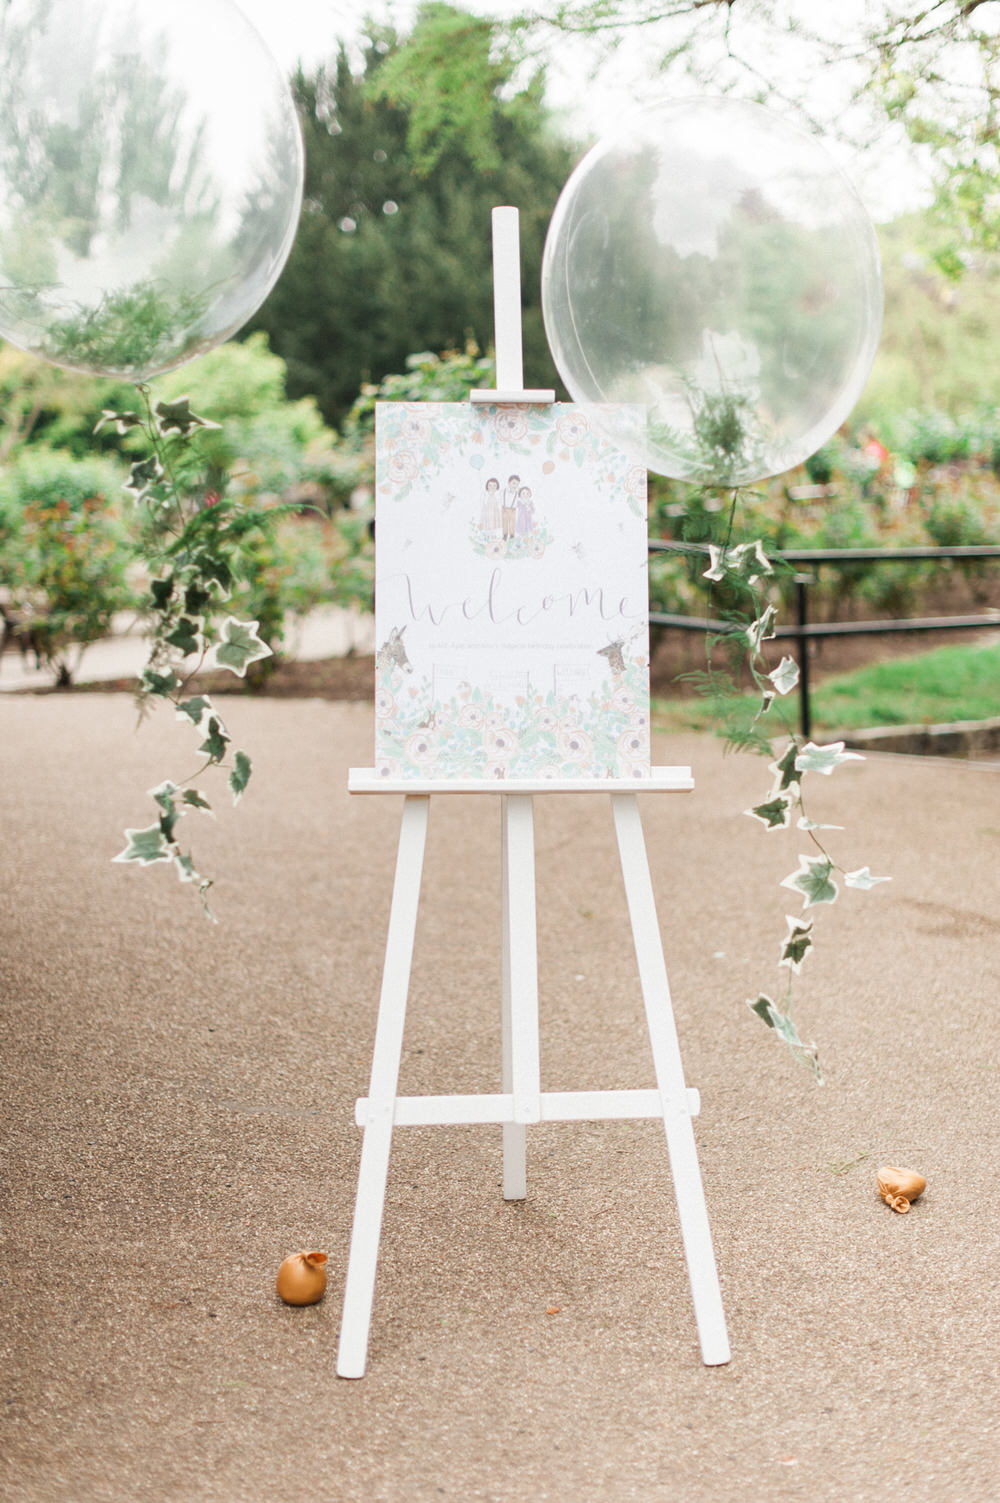 Party Welcome Sign | Illustrated welcome sign | A Midsummer nights dream inspired children's birthday party with stunning floral, fairy entertainment, crafts and a picnic. Photos by Kate Nielen.